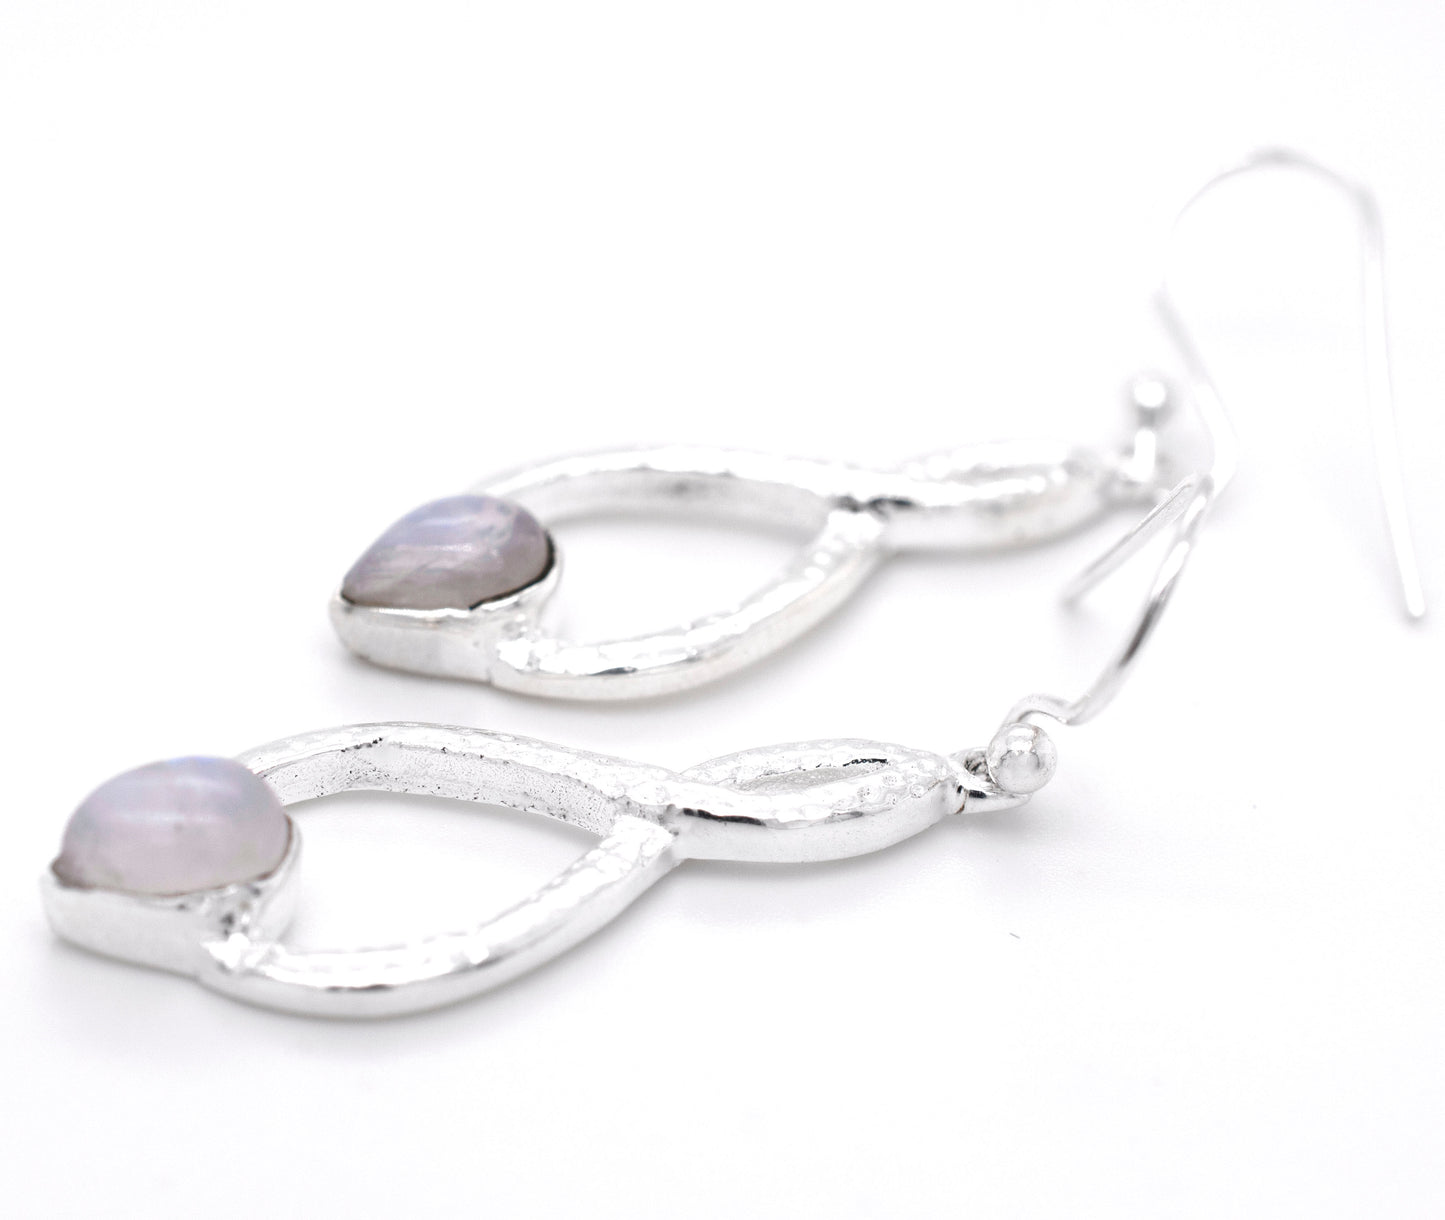 Glamorous Chic Moonstone Teardrop Earrings with a moonstone by Super Silver.